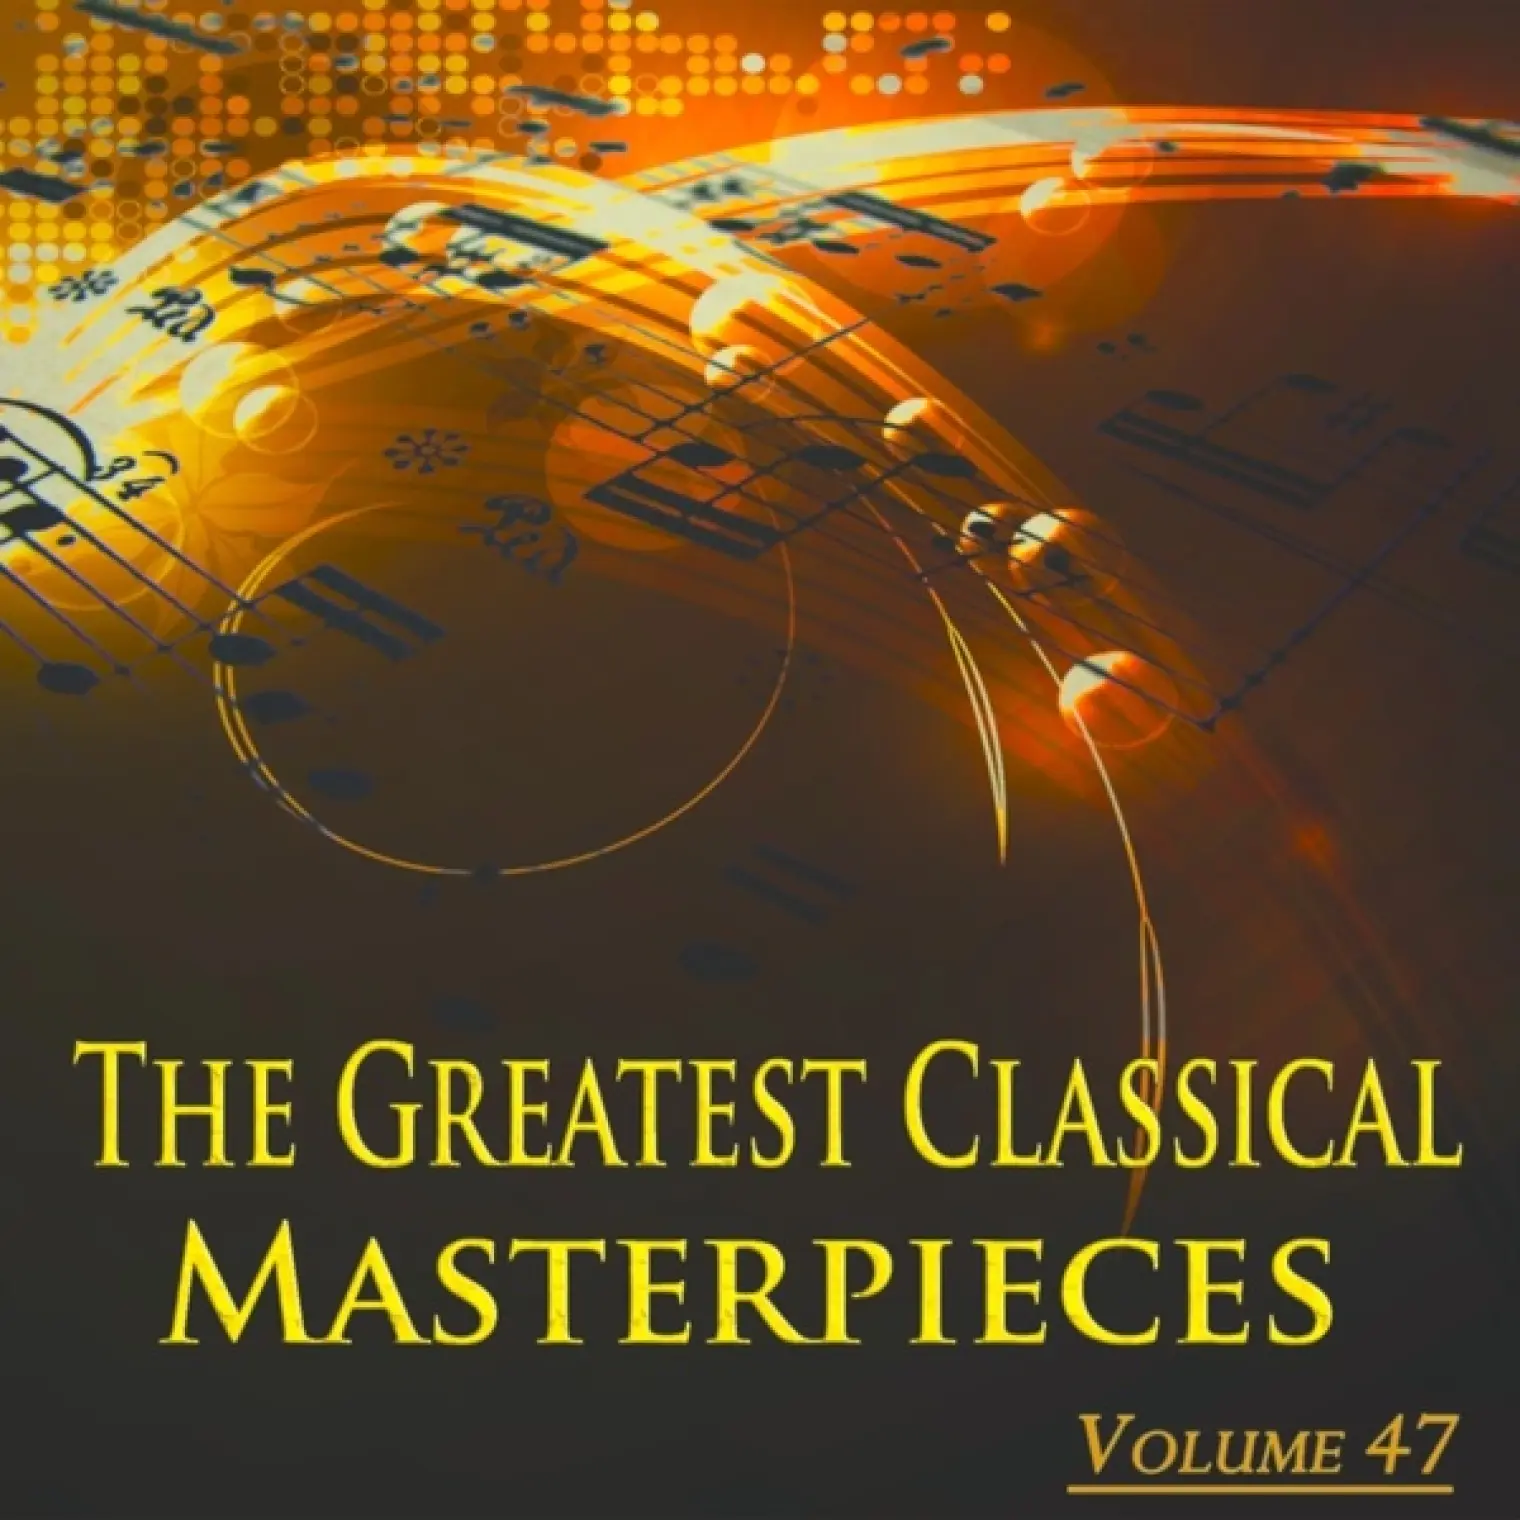 The Greatest Classical Masterpieces, Vol. 47 (Remastered) -  Various Artists 